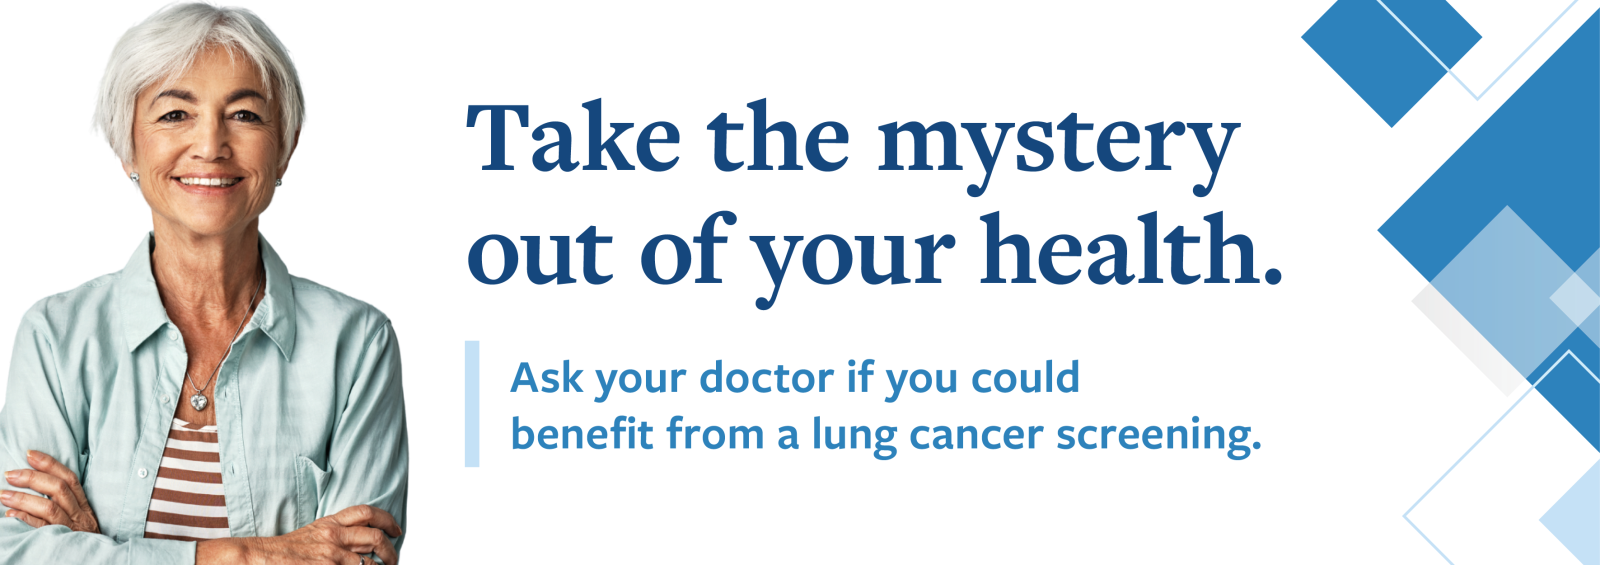 Photo of a woman. Text reads, "Take the mystery out of your health. Ask your doctor if you could benefit from a lung cancer screening."